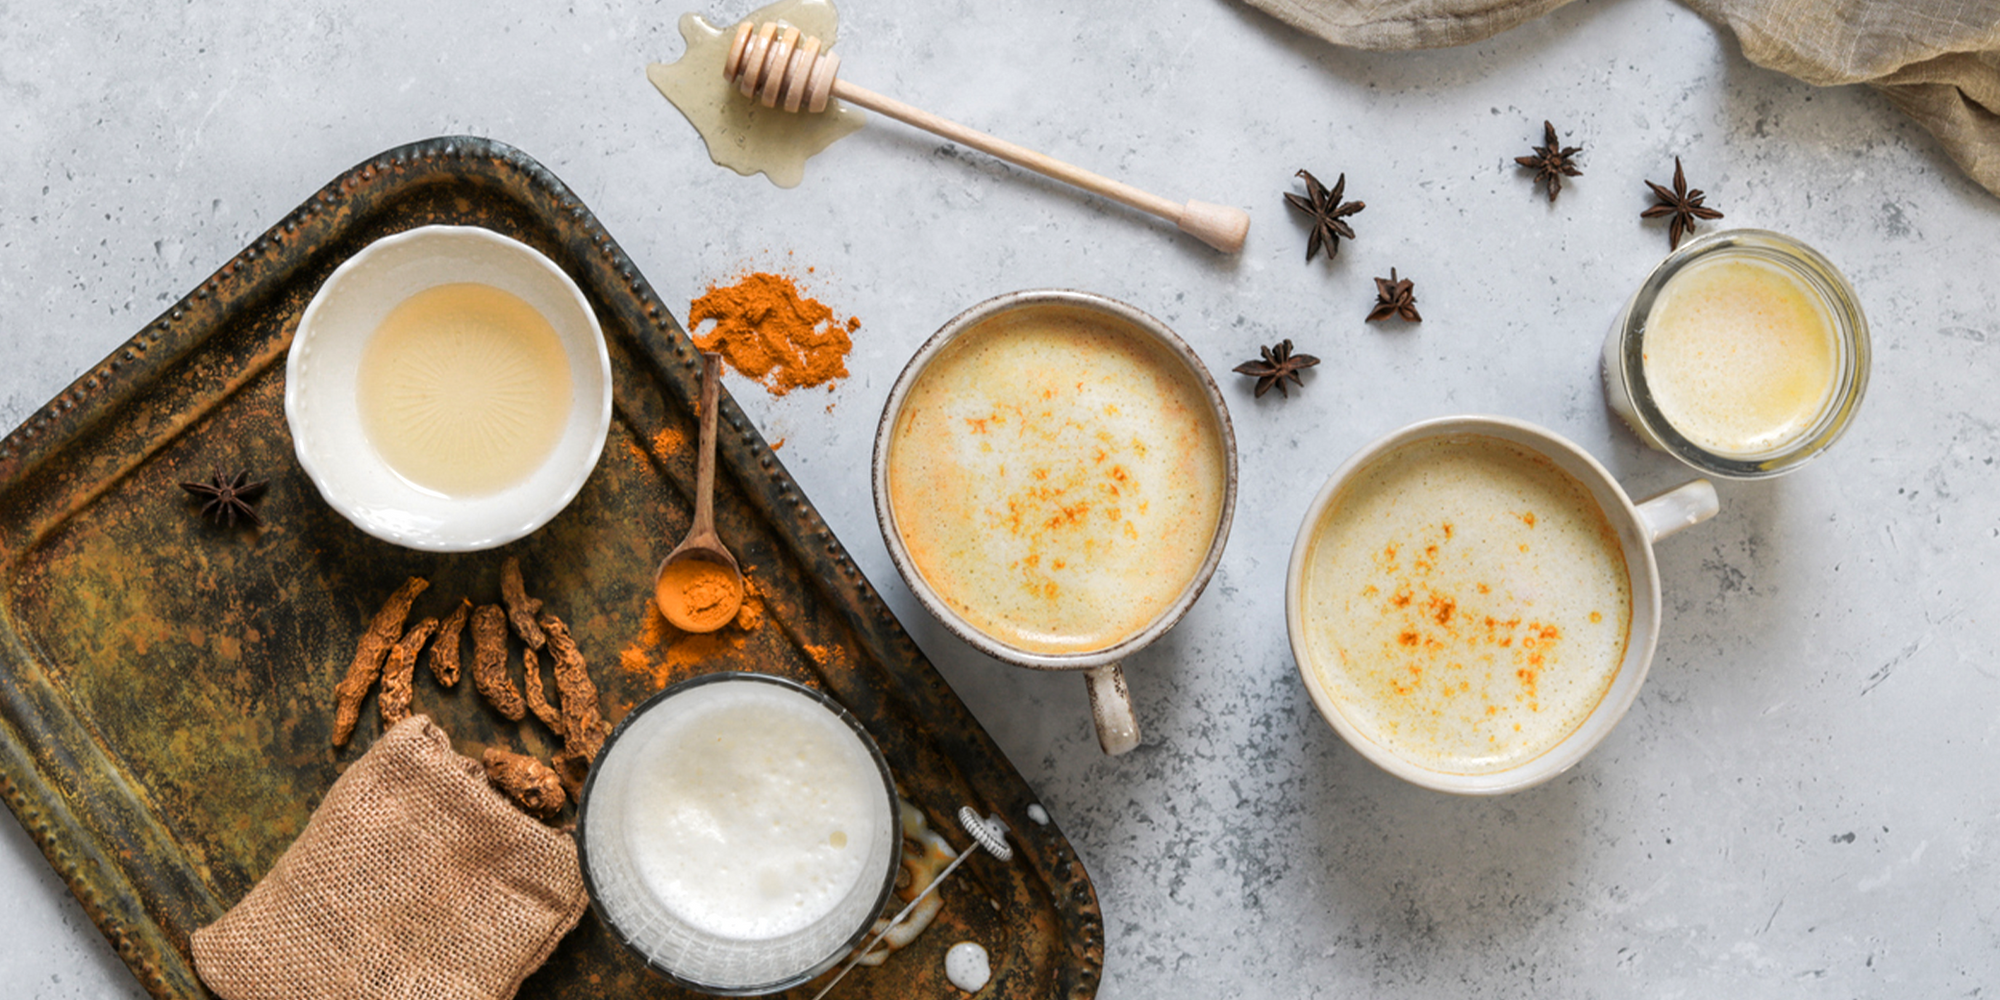 Spice Up Your Holidays: Three Turmeric and Ginger Infused Drinks